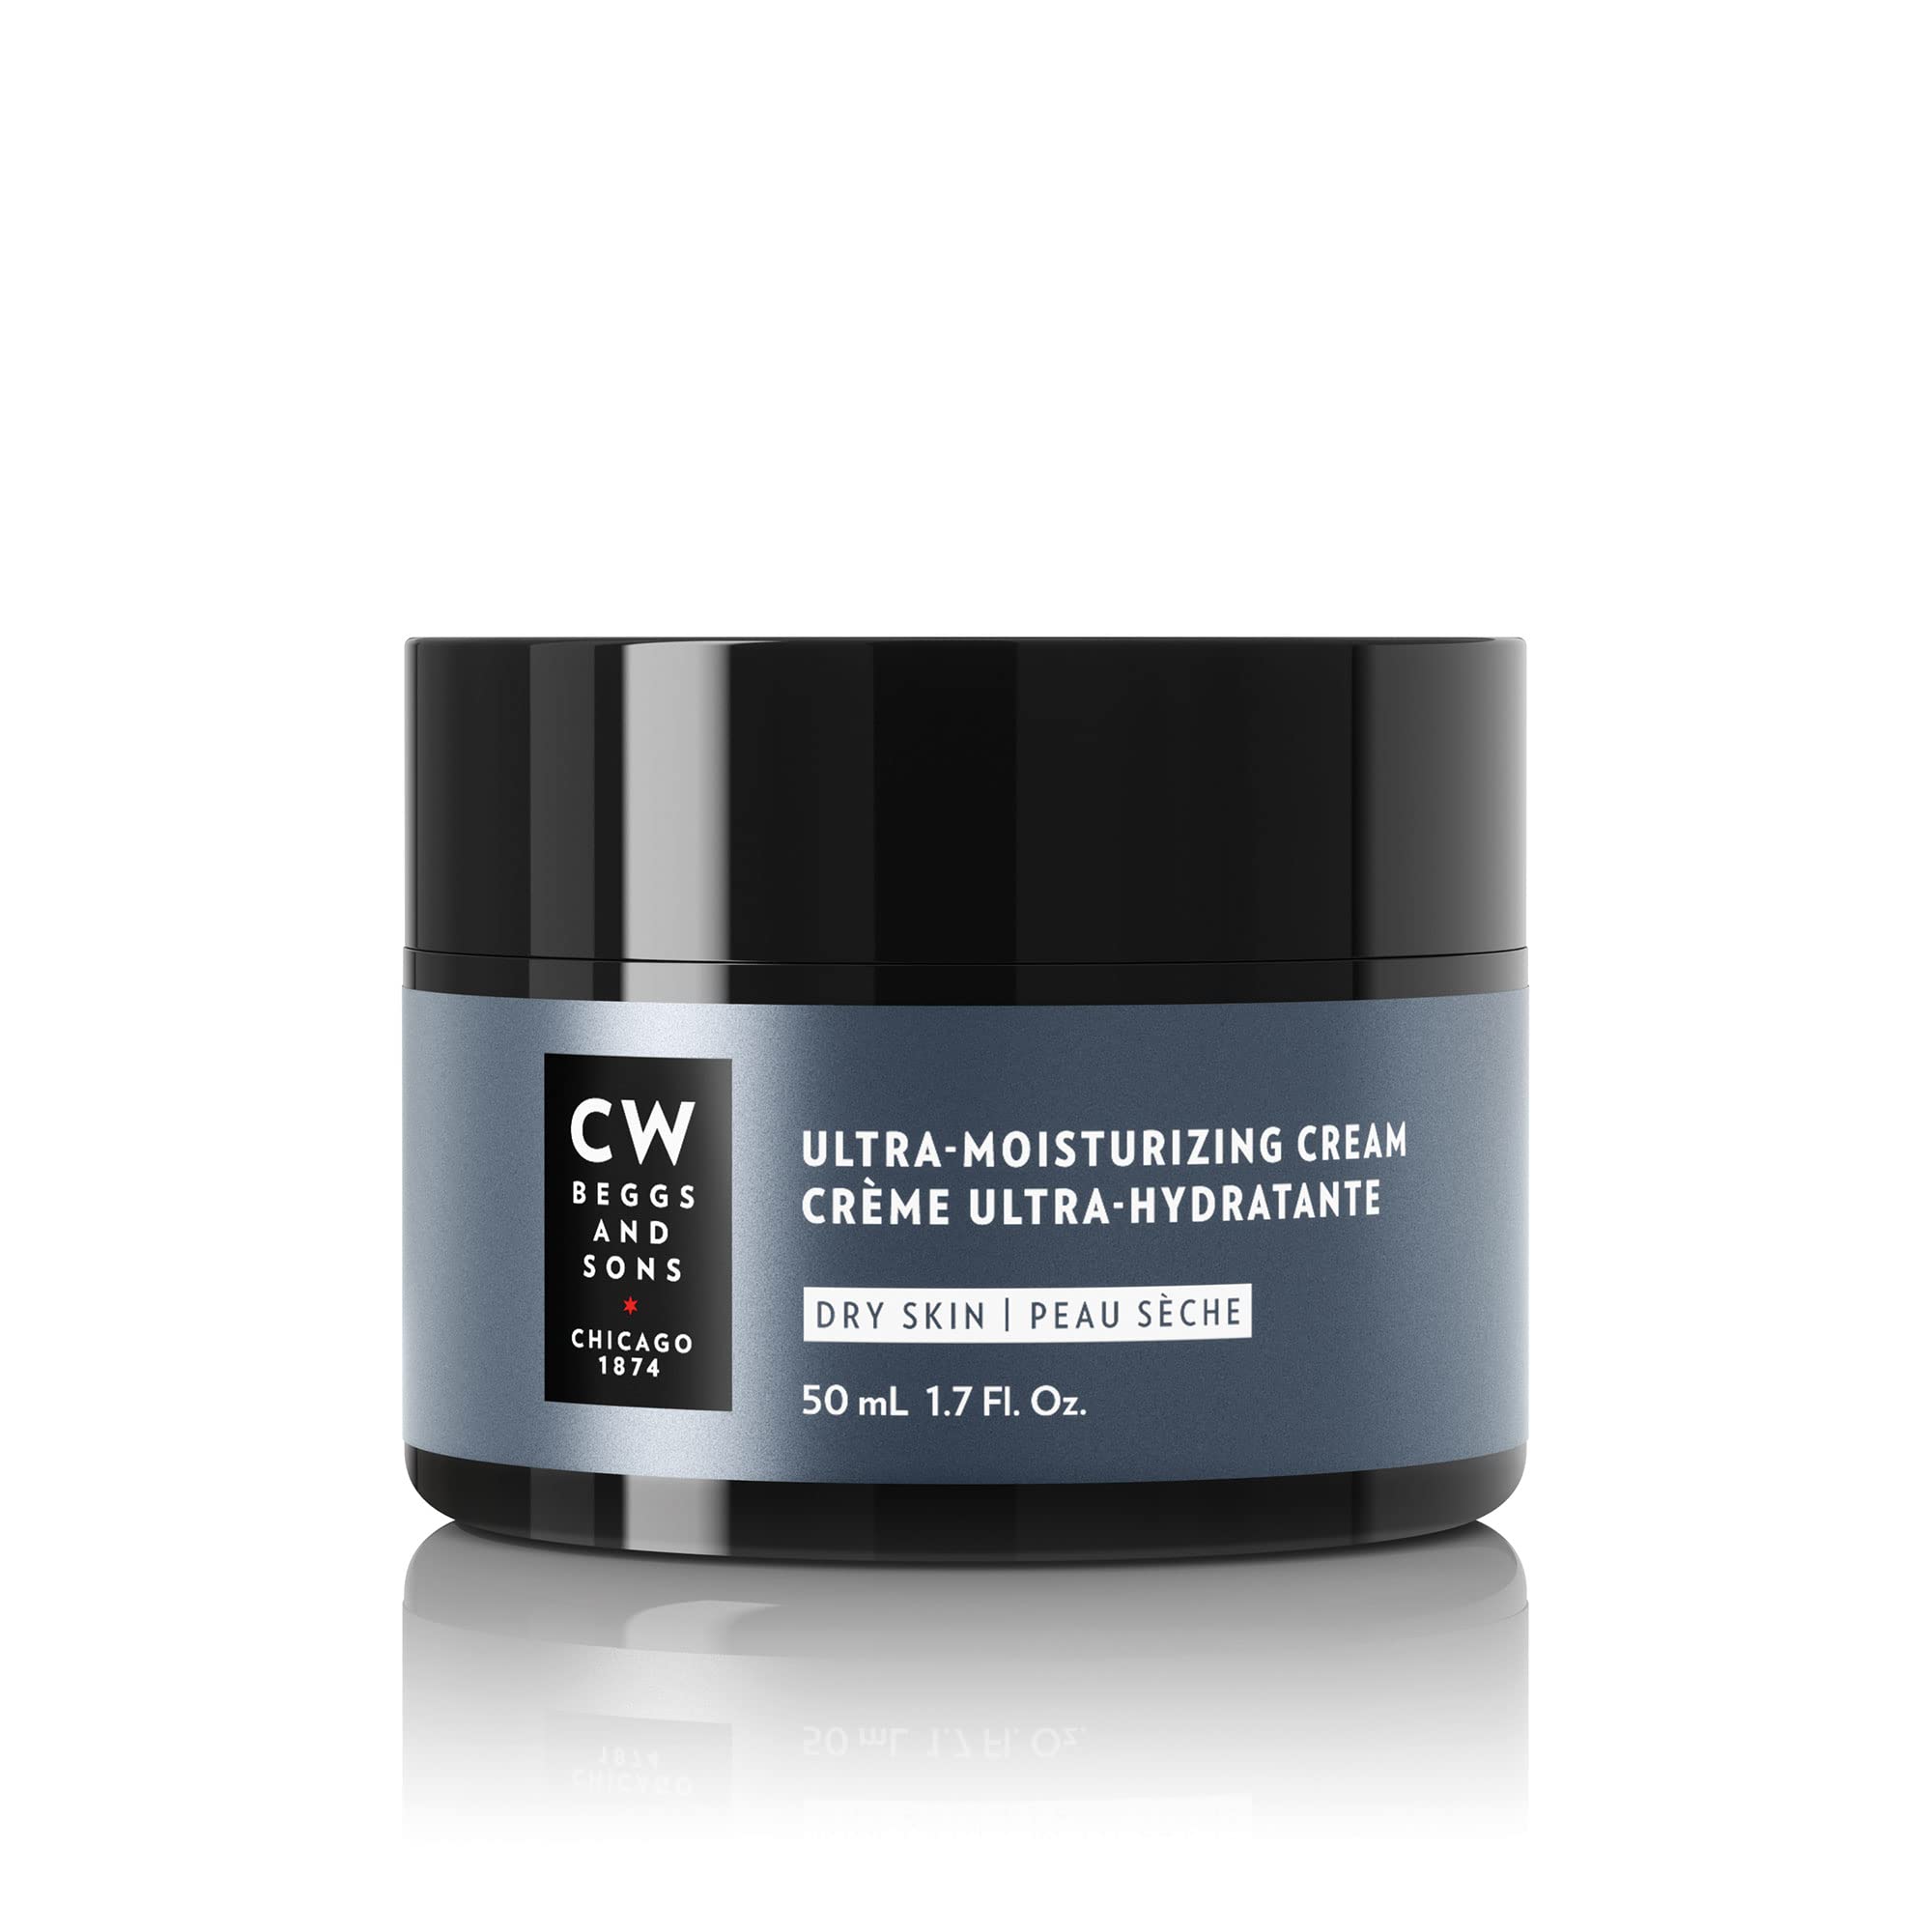 CW Beggs Ultra-Moisturizing Cream for Men, Dry Skin, Face Moisturizer, Hypoallergenic, Fragrance-Free, Paraben-Free, Alcohol-Free, Mineral Oil-Free, Cruelty-Free, 50 mL